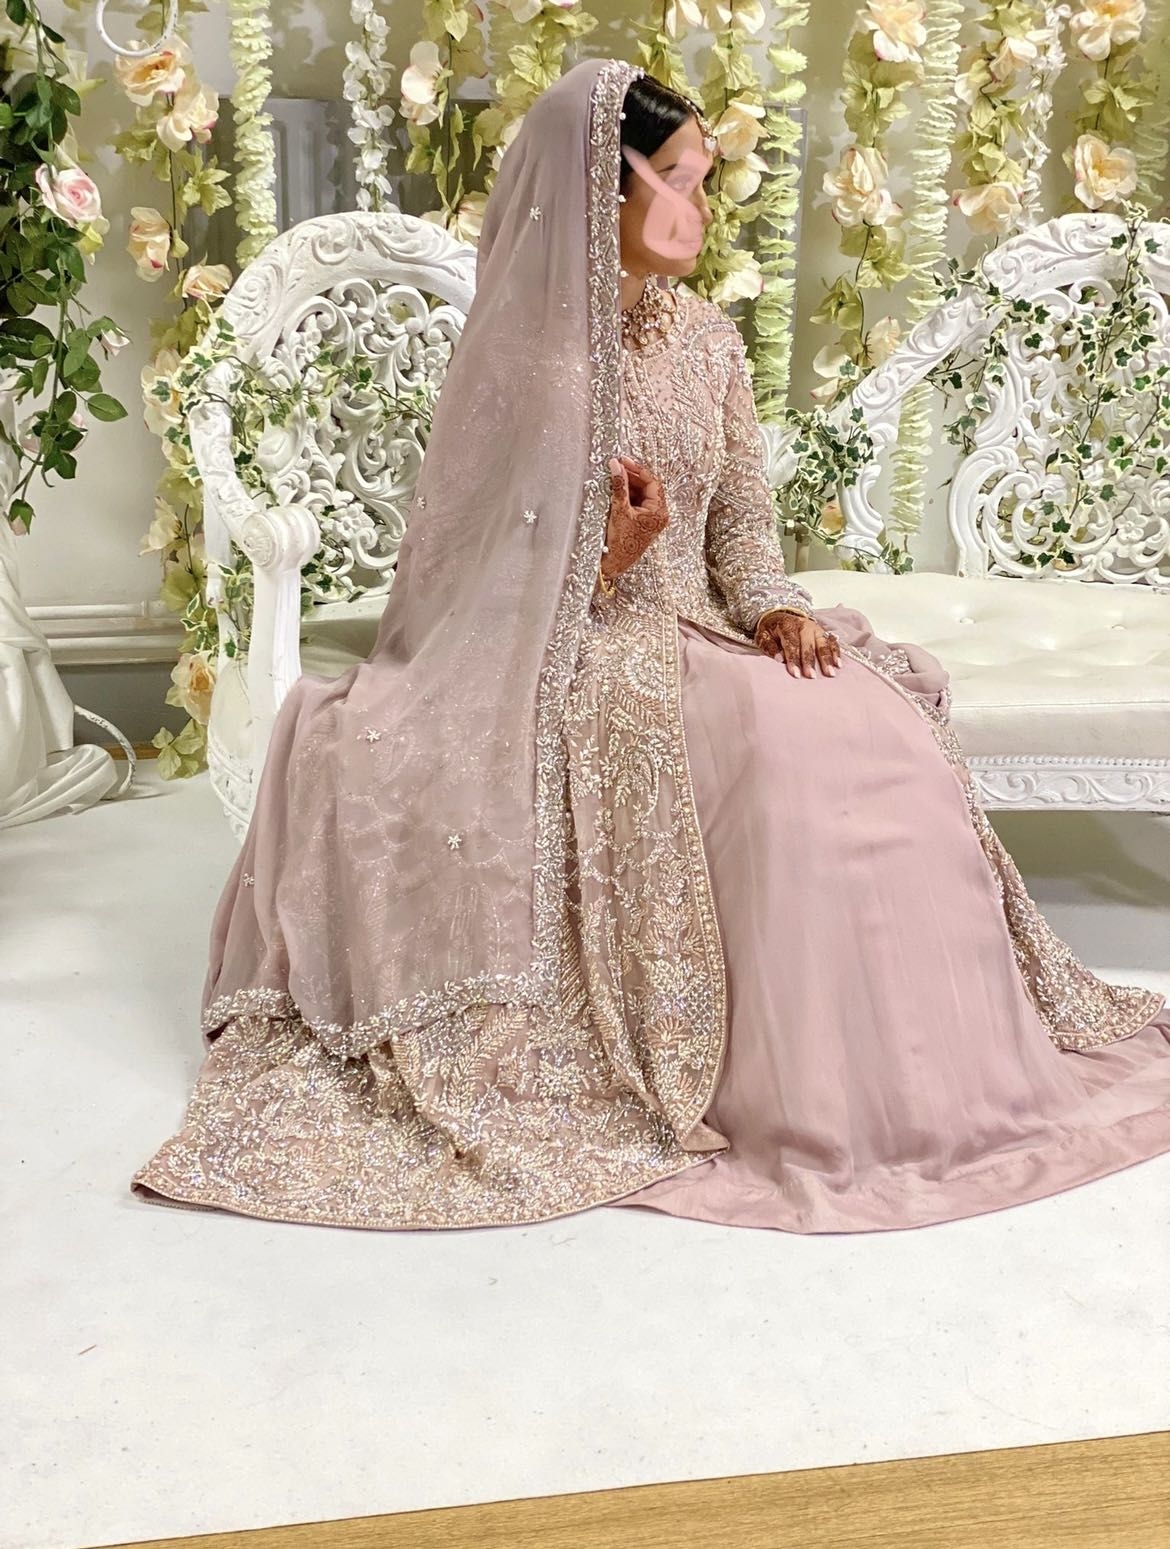 Mongas bridal / occasion wear outfit